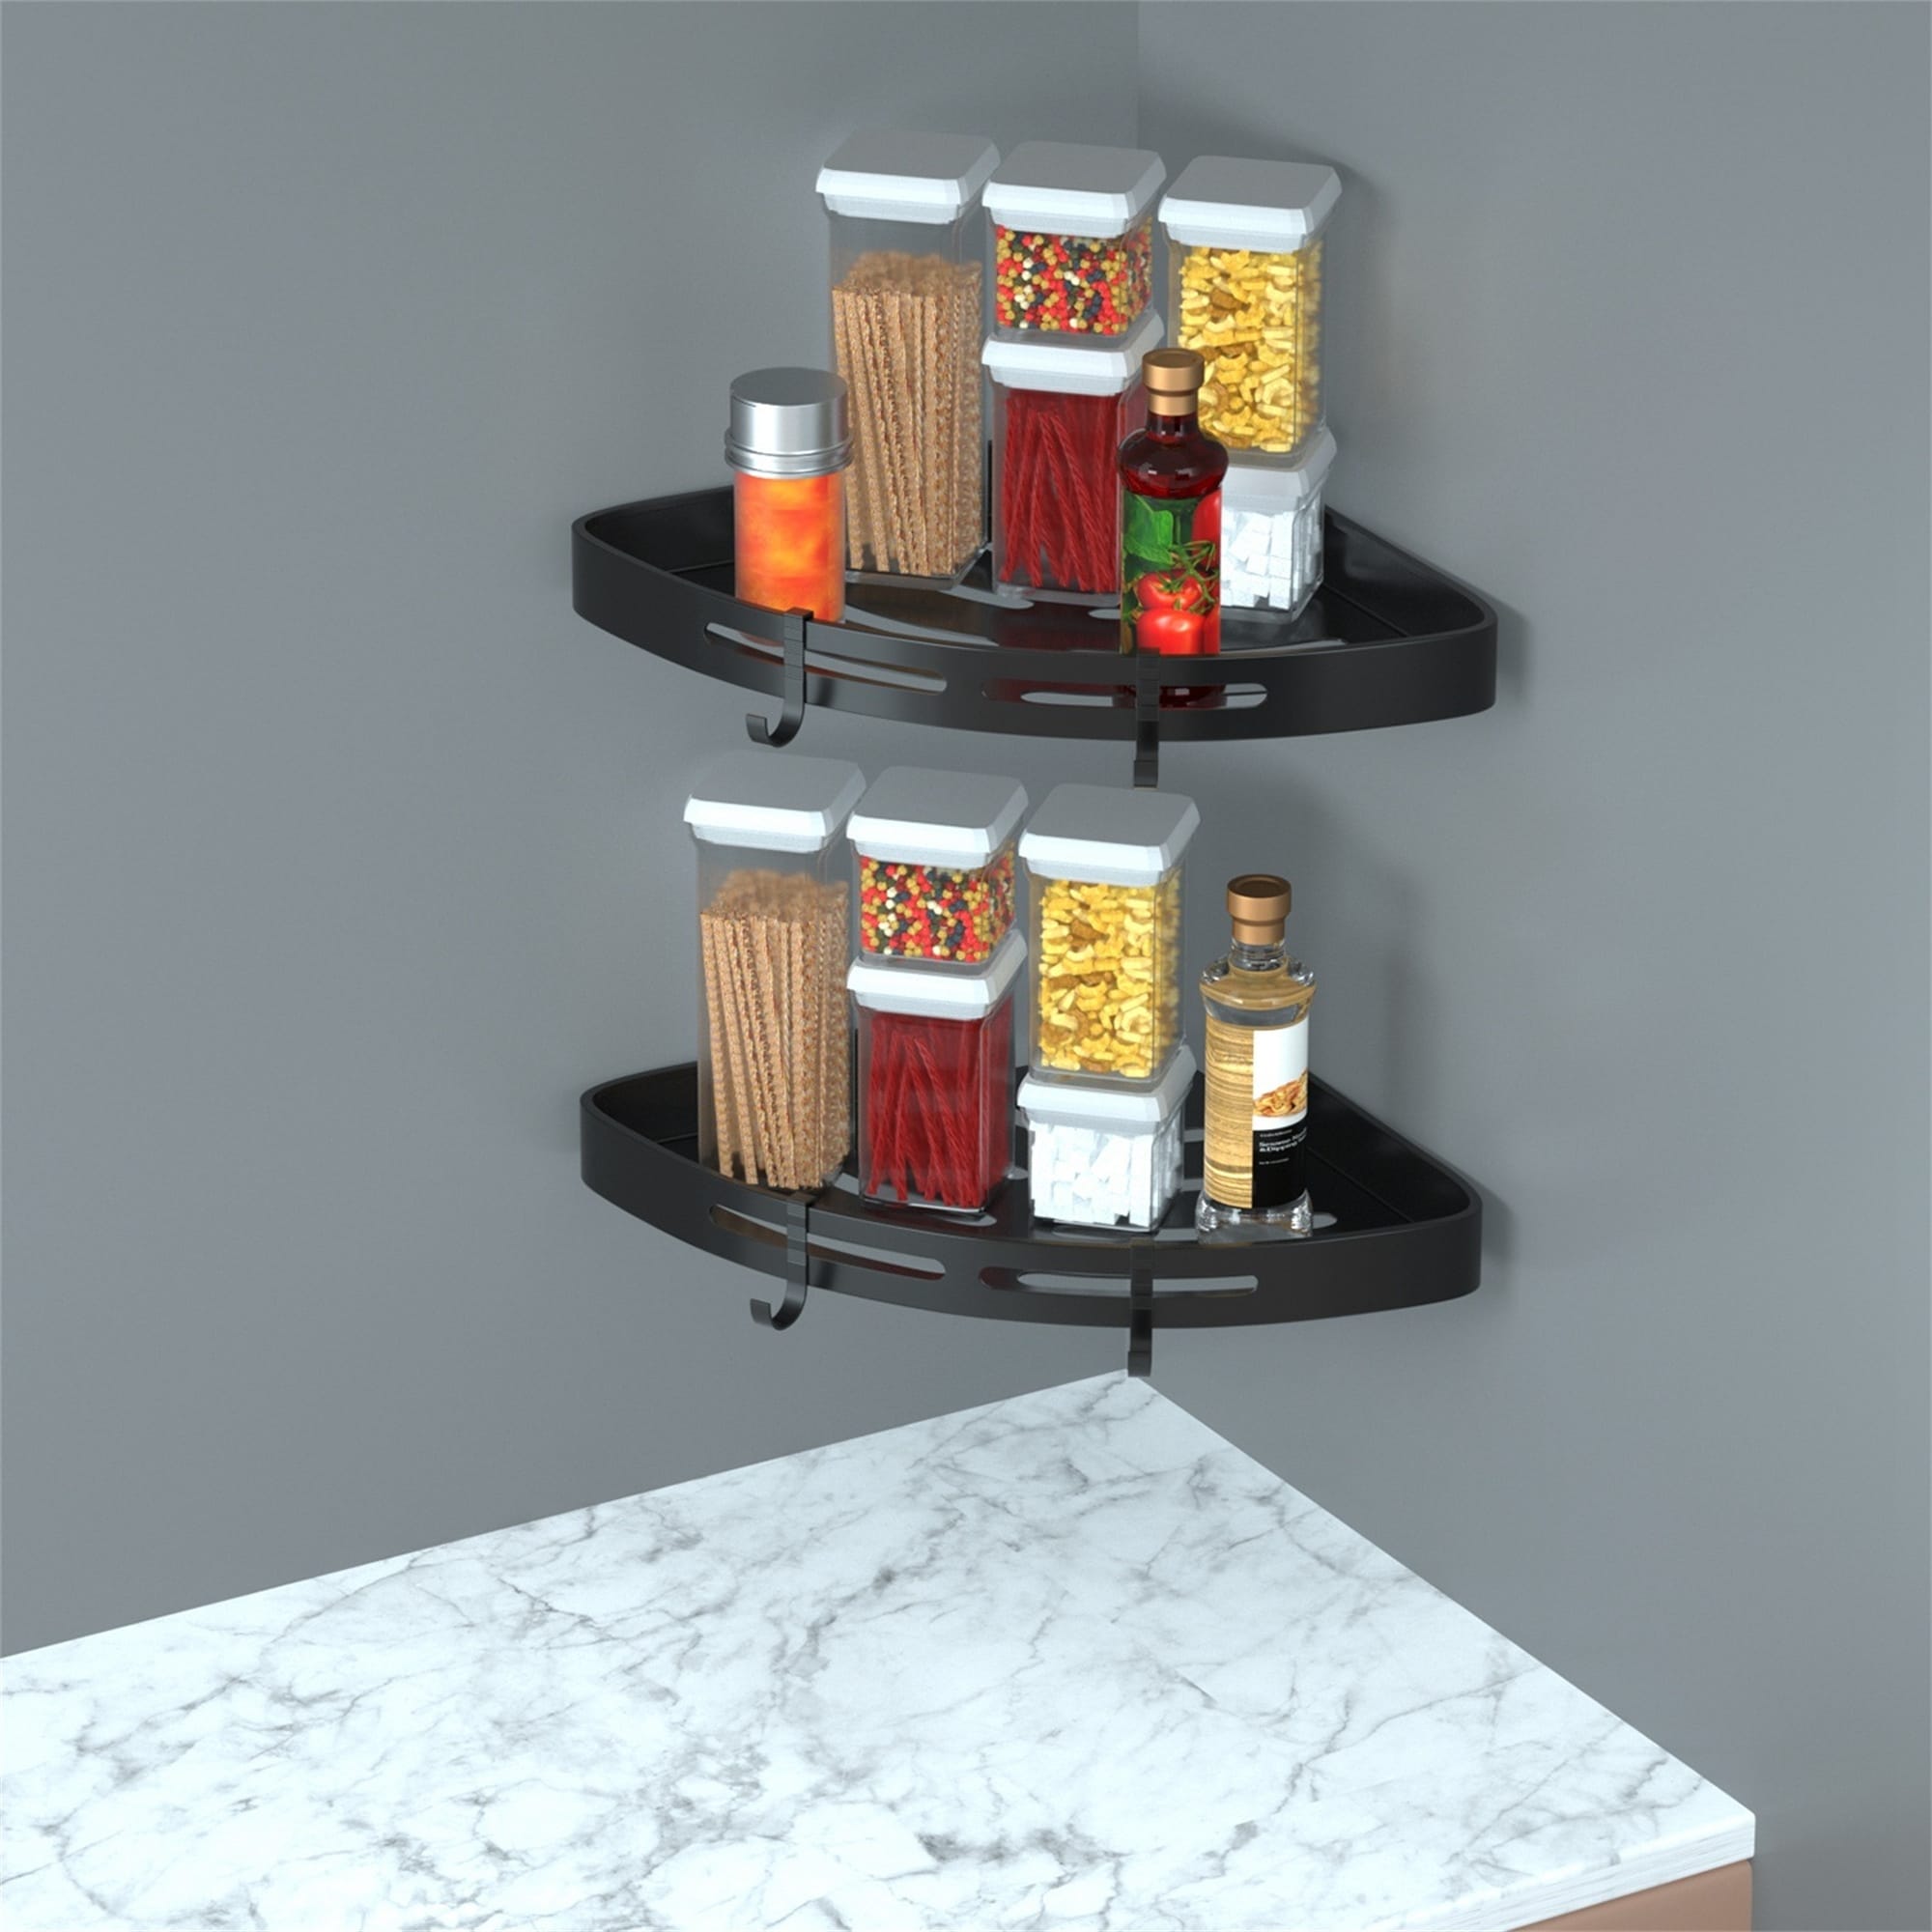 Search for Adhesive Corner Shelf For Shower  Discover our Best Deals at  Bed Bath & Beyond